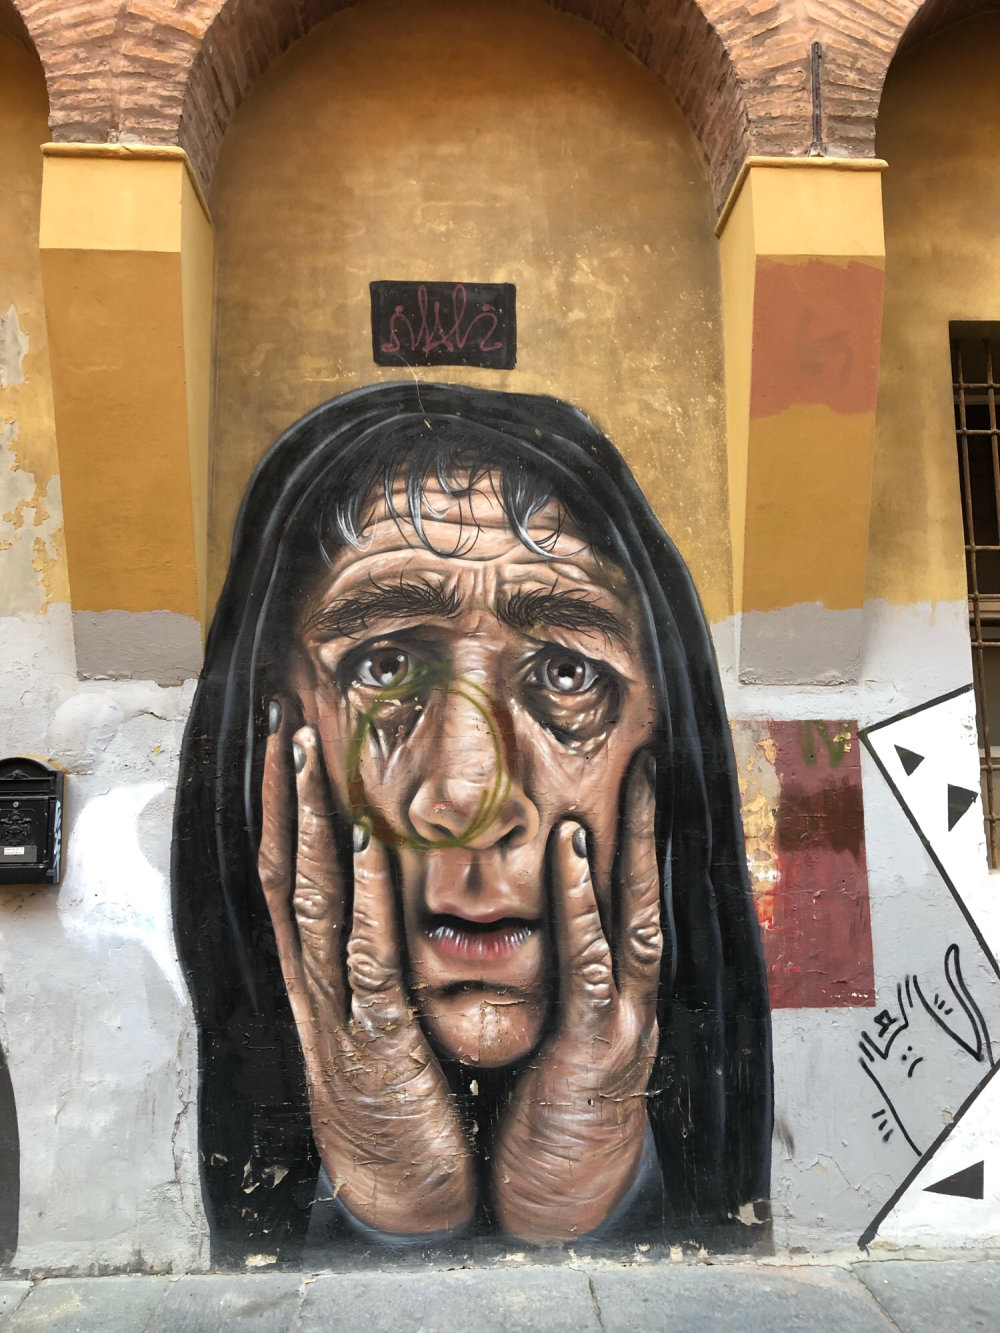 mural in Bologna by artist unknown.